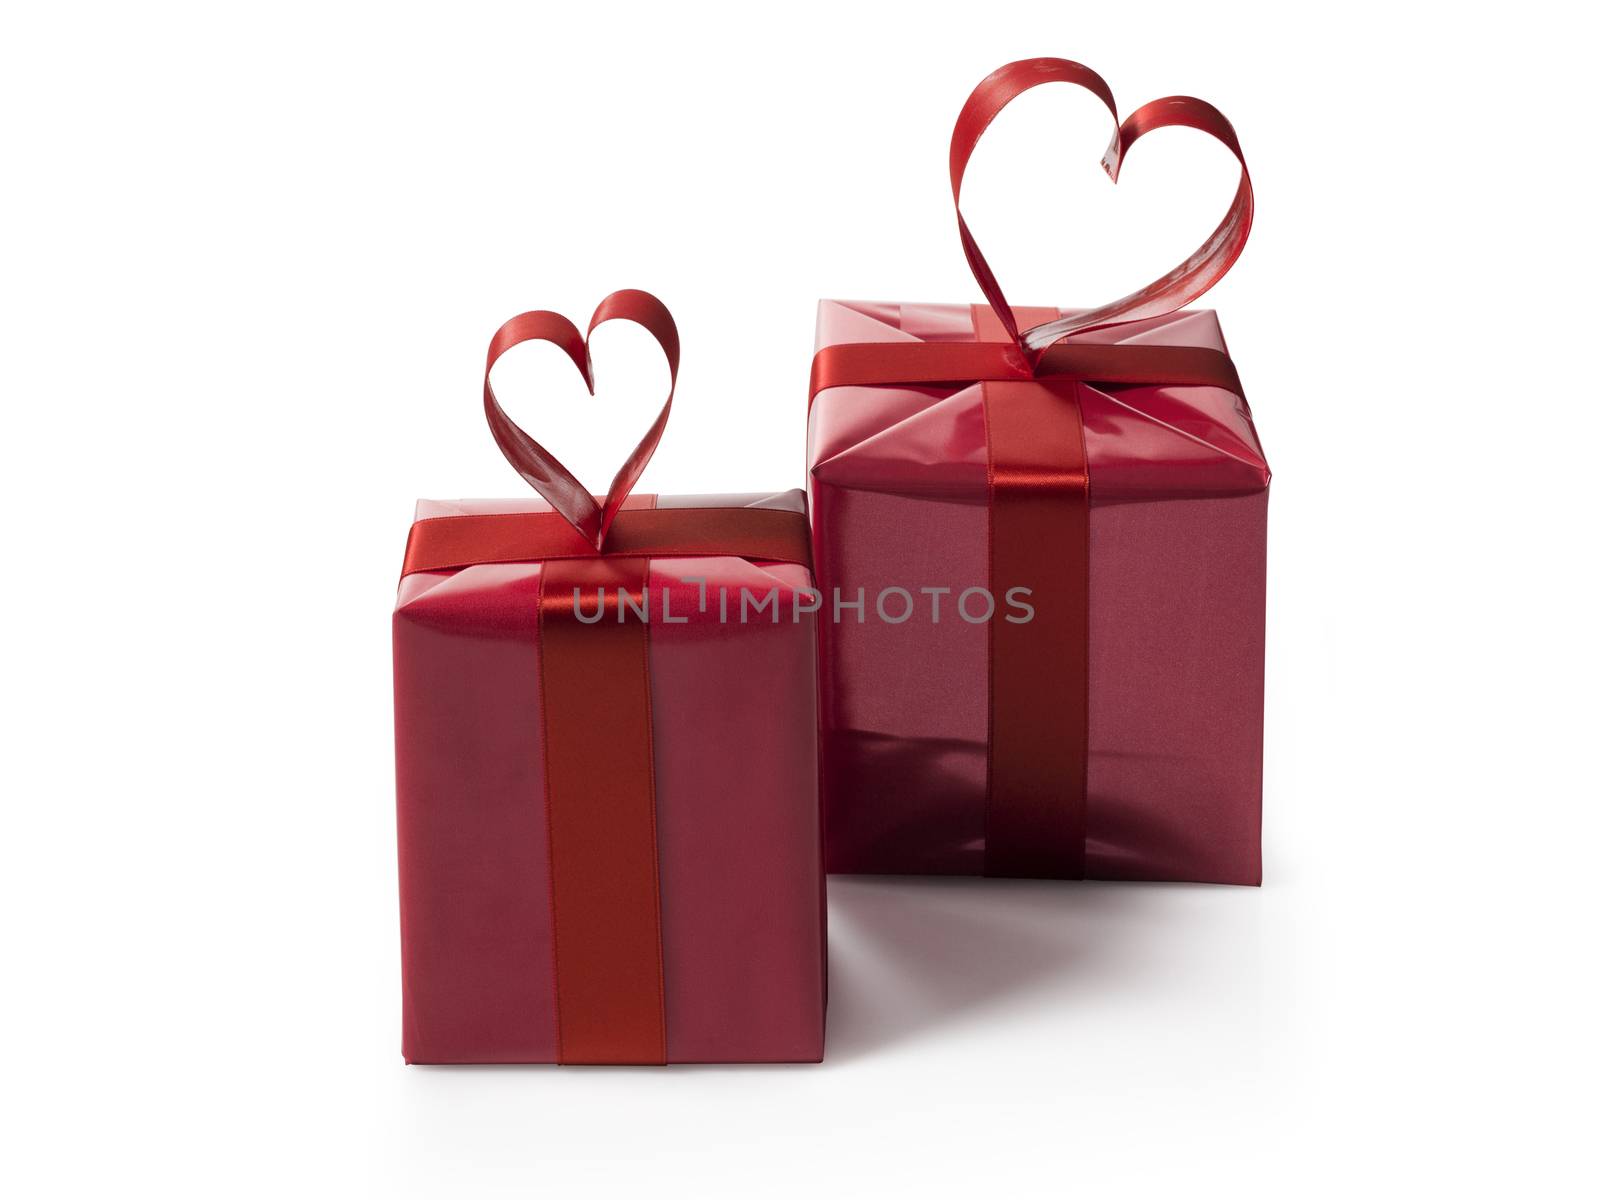 two red gift boxes with red hart shaped ribbon bow by janssenkruseproductions